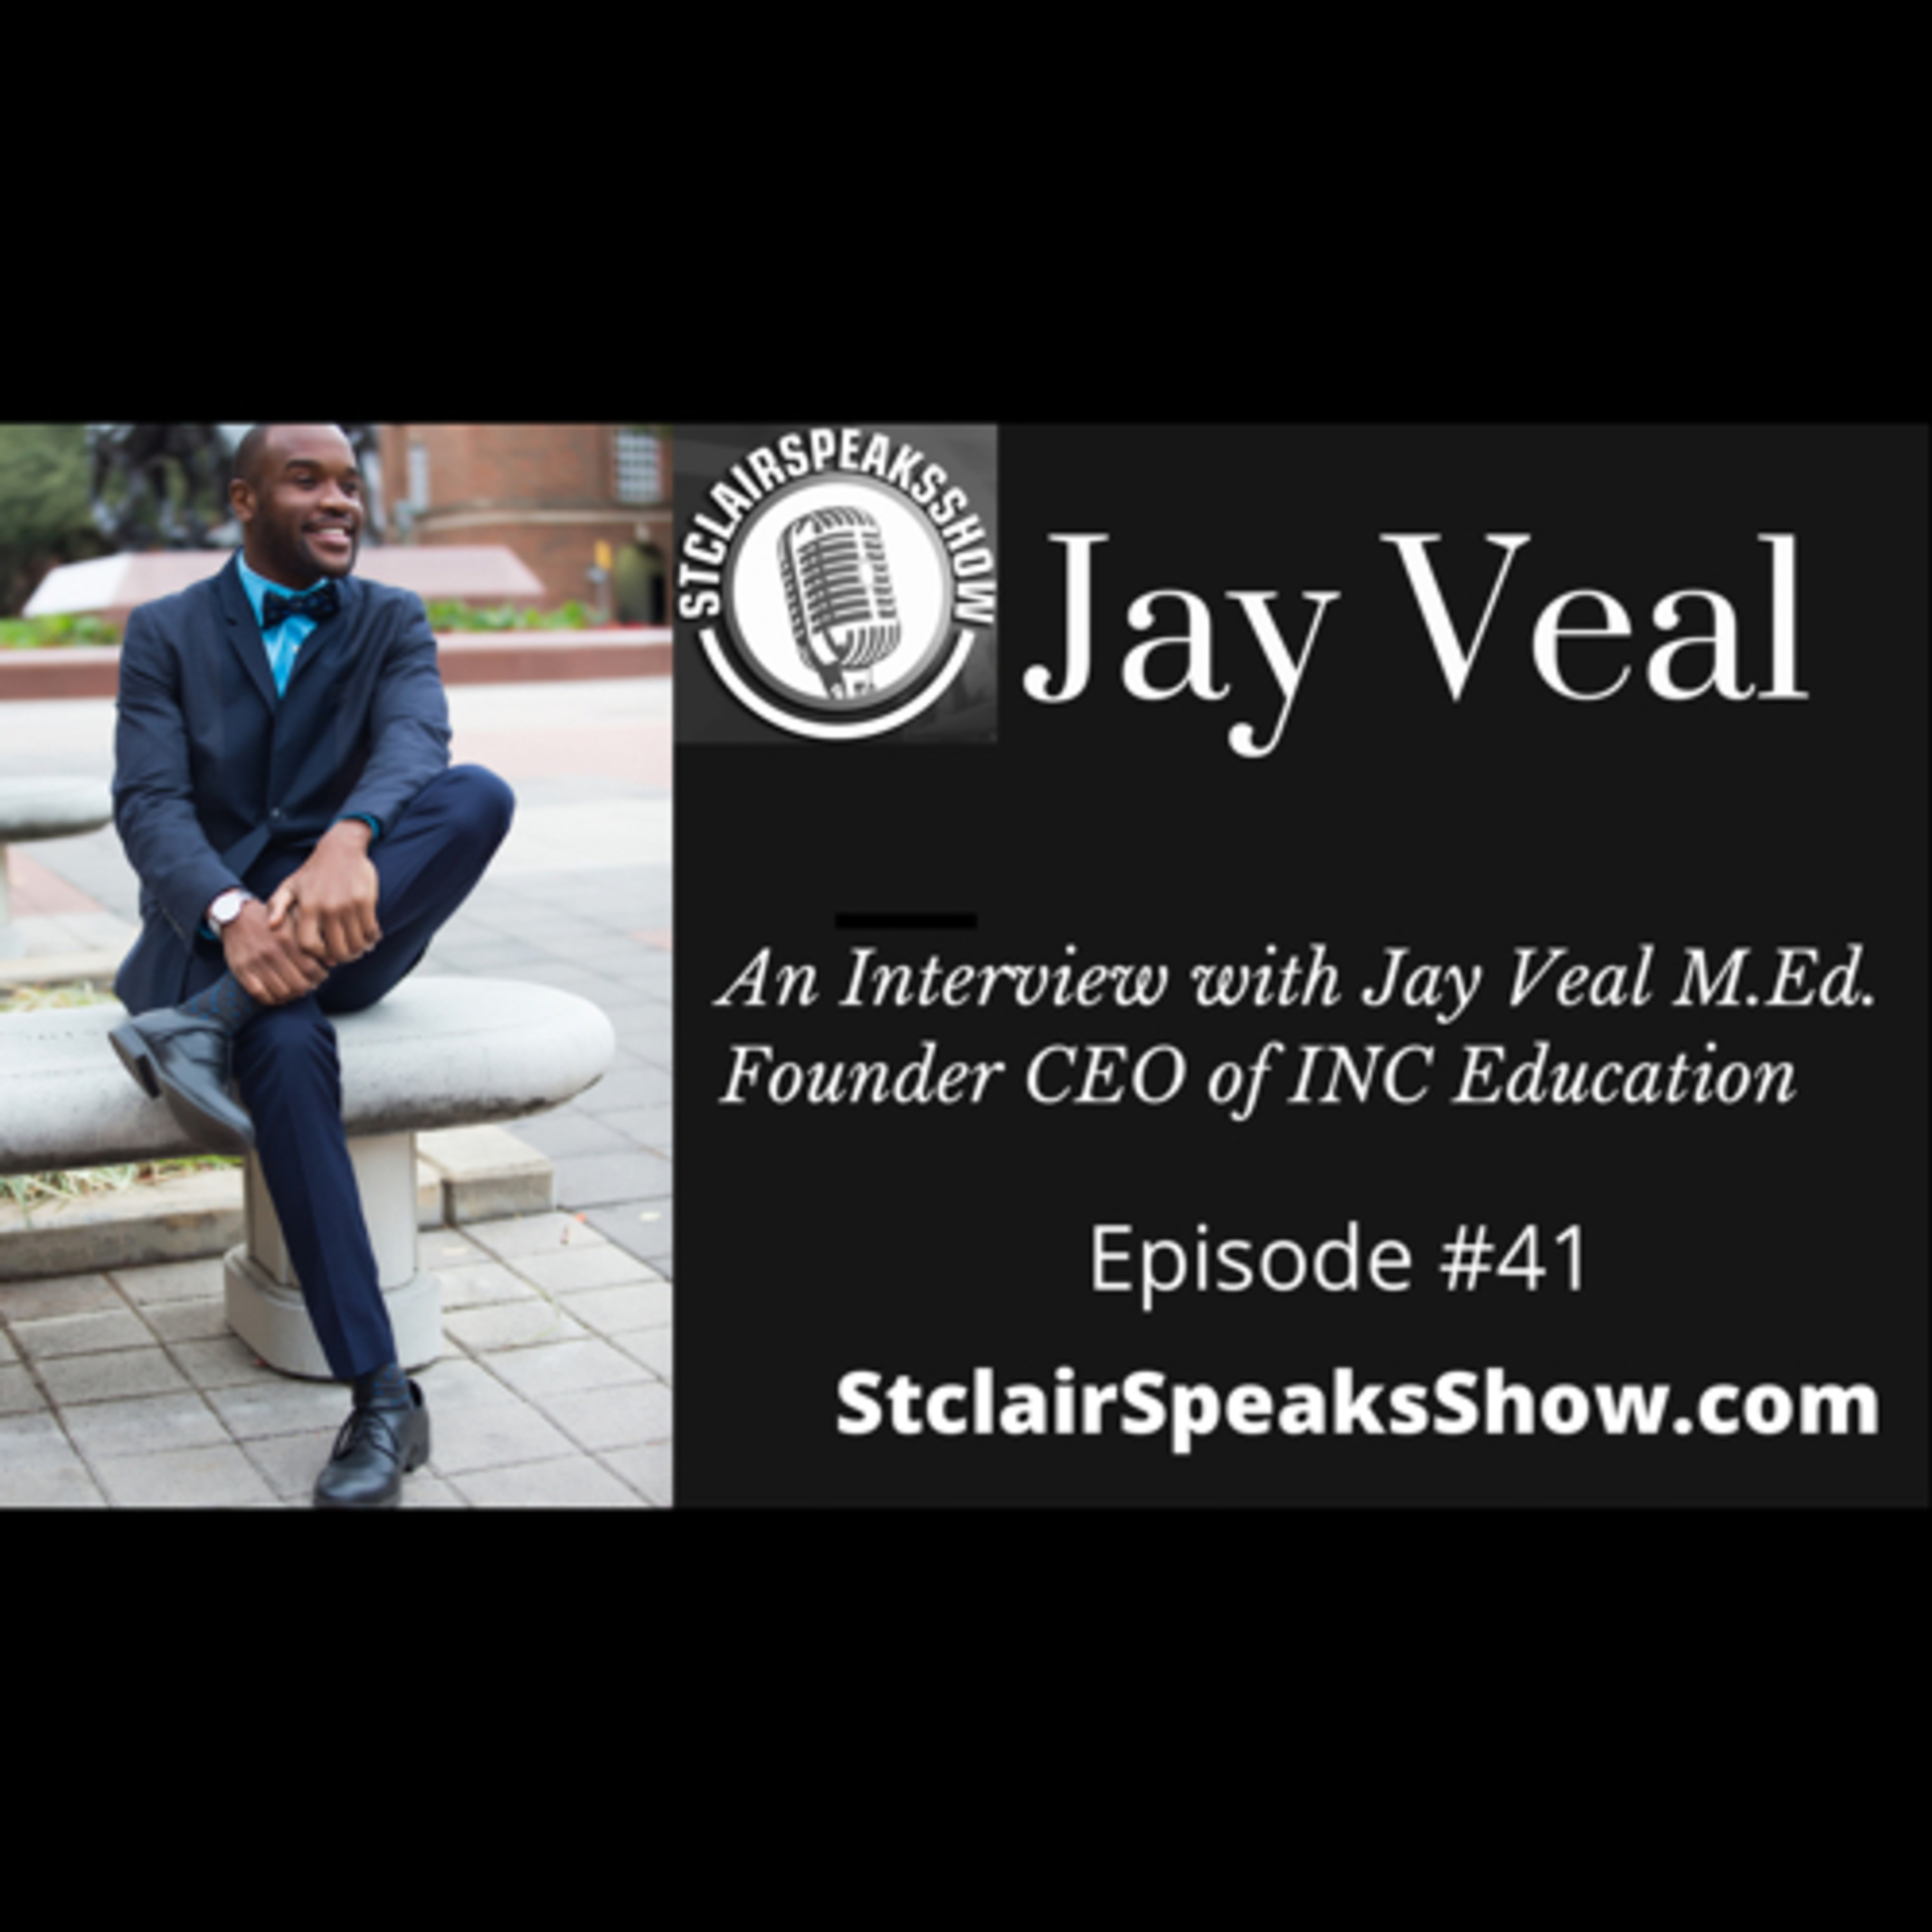 The StclairSpeaksshow Podcast Featuring Jay Veal M.Ed. Founder / CEO, INC Education Episode #41